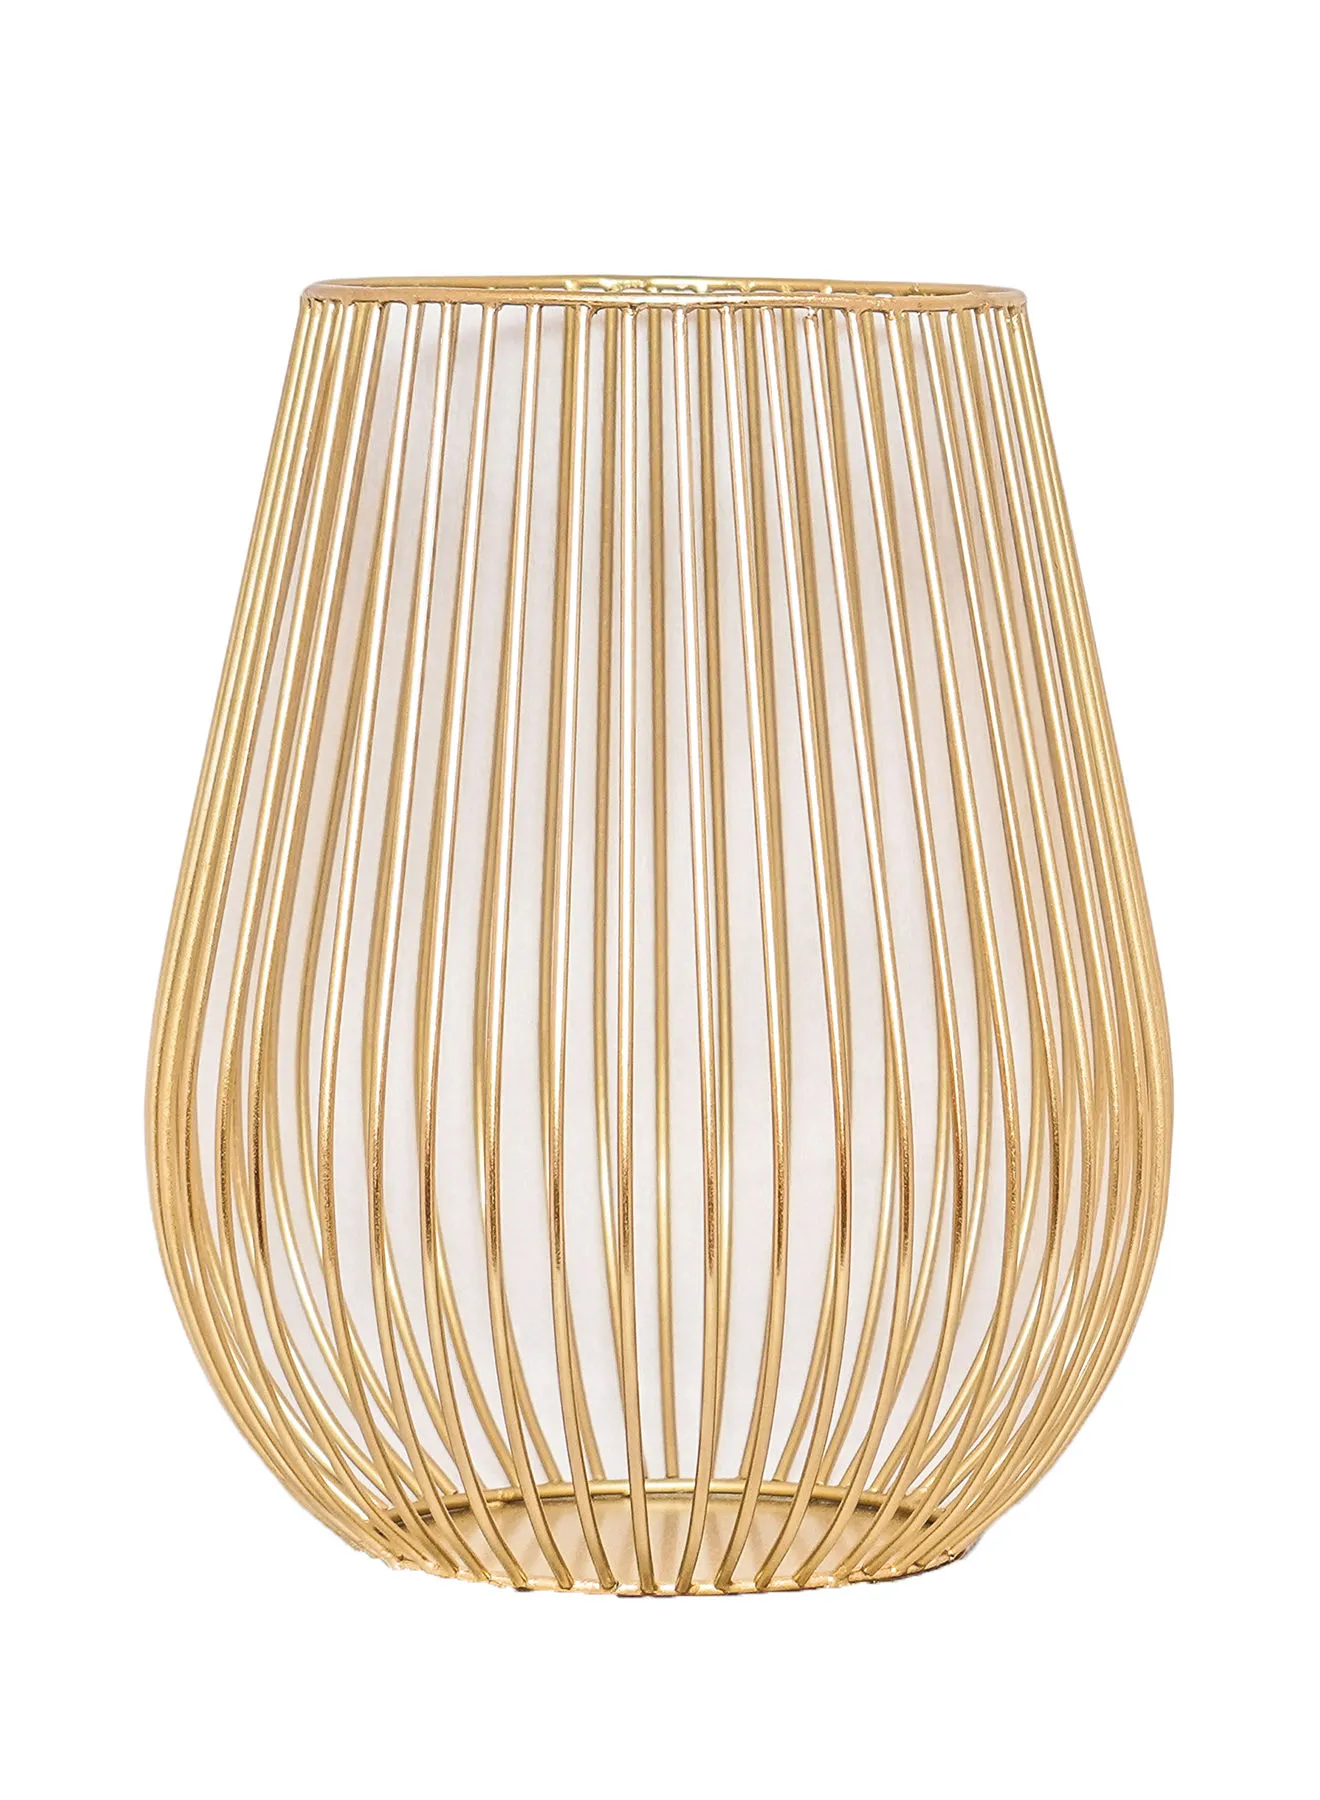 ebb & flow Modern Handmade Candle Holder Lantern Unique Luxury Quality Scents For The Perfect Stylish Home Gold 21 x 21 x 26centimeter